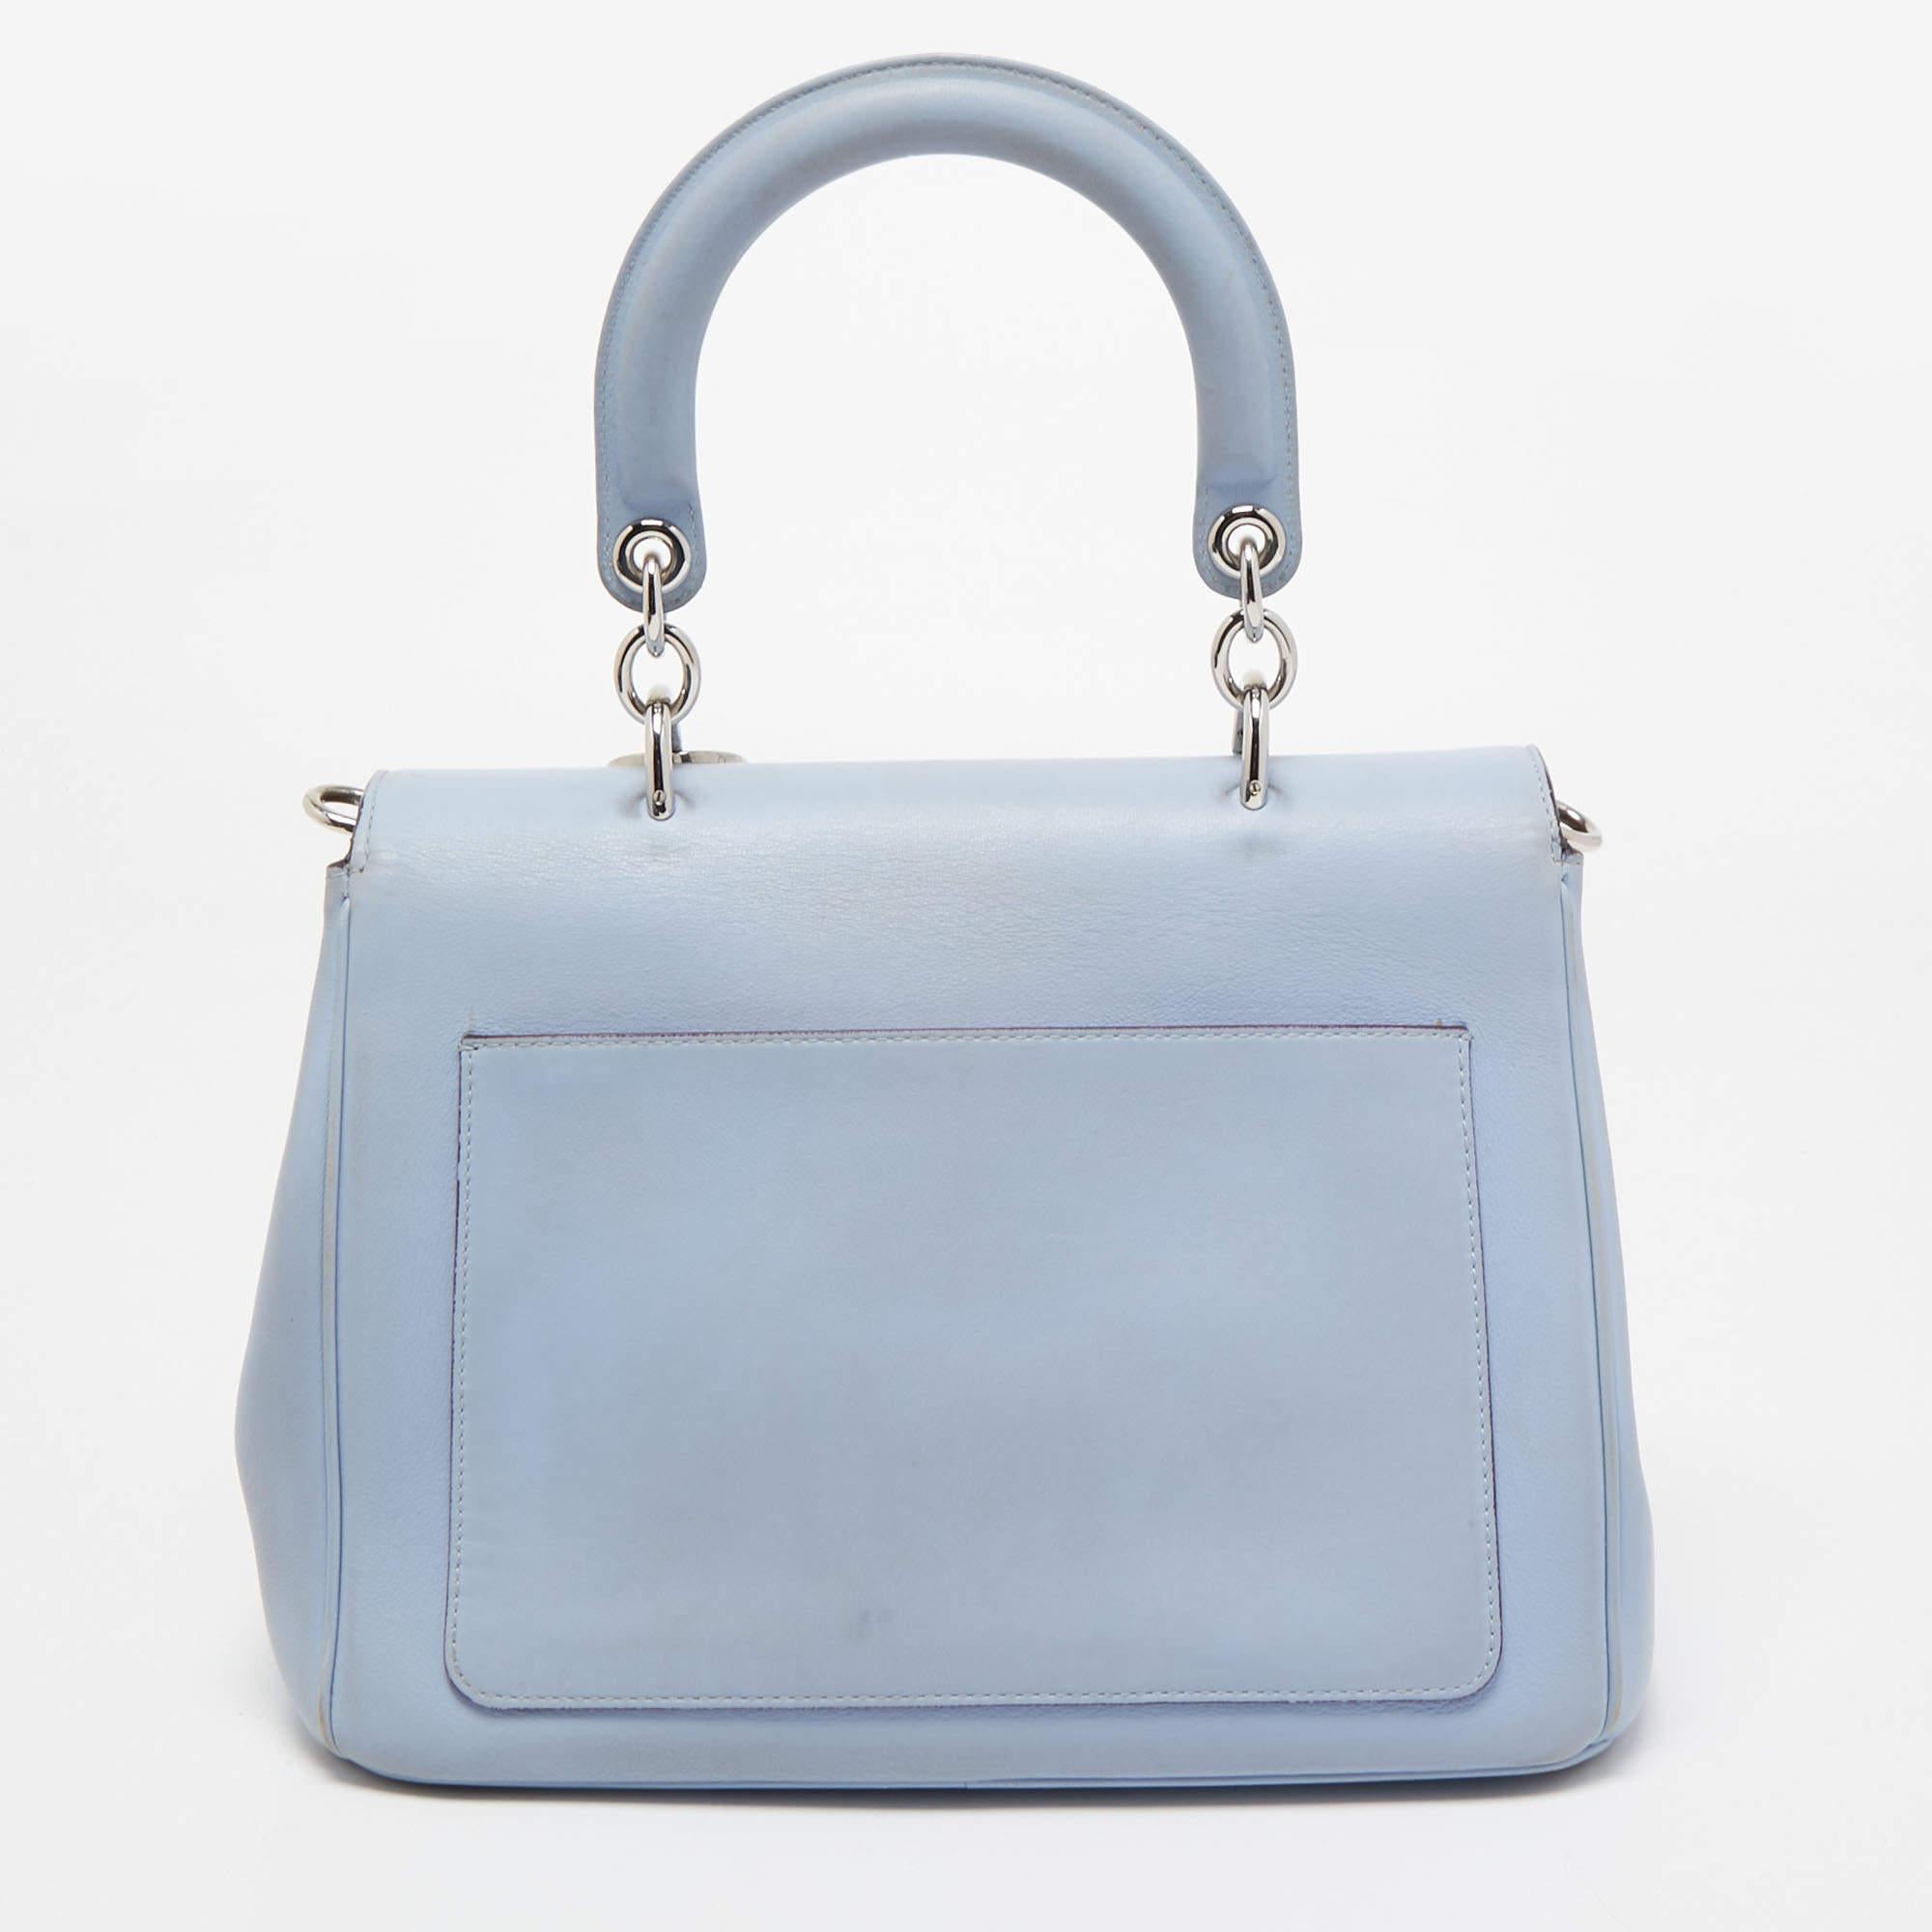 This Be Dior bag from the House of Dior is sure to add sparks of luxury to your wardrobe! It is crafted using light blue leather on the exterior, with the signature D.I.O.R charms embellishing the front. It has a top handle, silver-toned hardware,